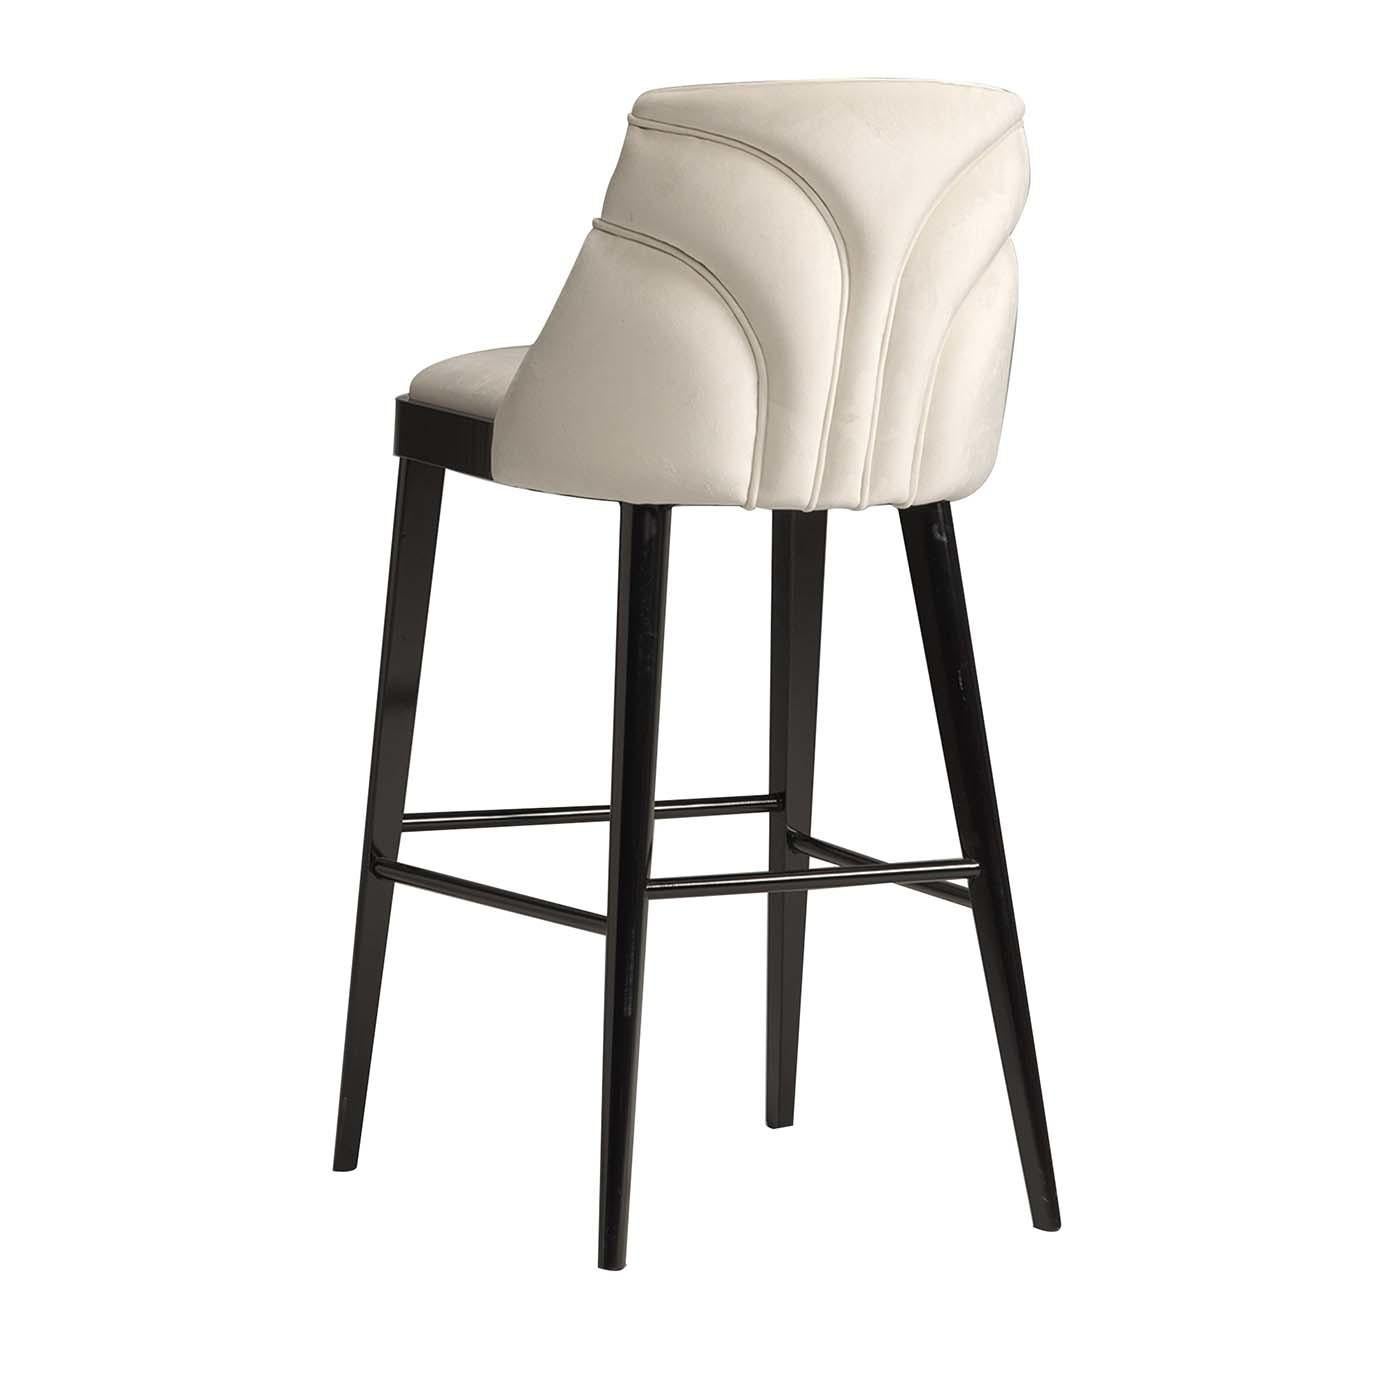 This fabulous stool with the Wave design makes a wonderful addition to any cosmopolitan style decor in the home. Combining tradition and modernity with a splendid look, this Oscar Collection piece features sophisticated elements, such as wood and